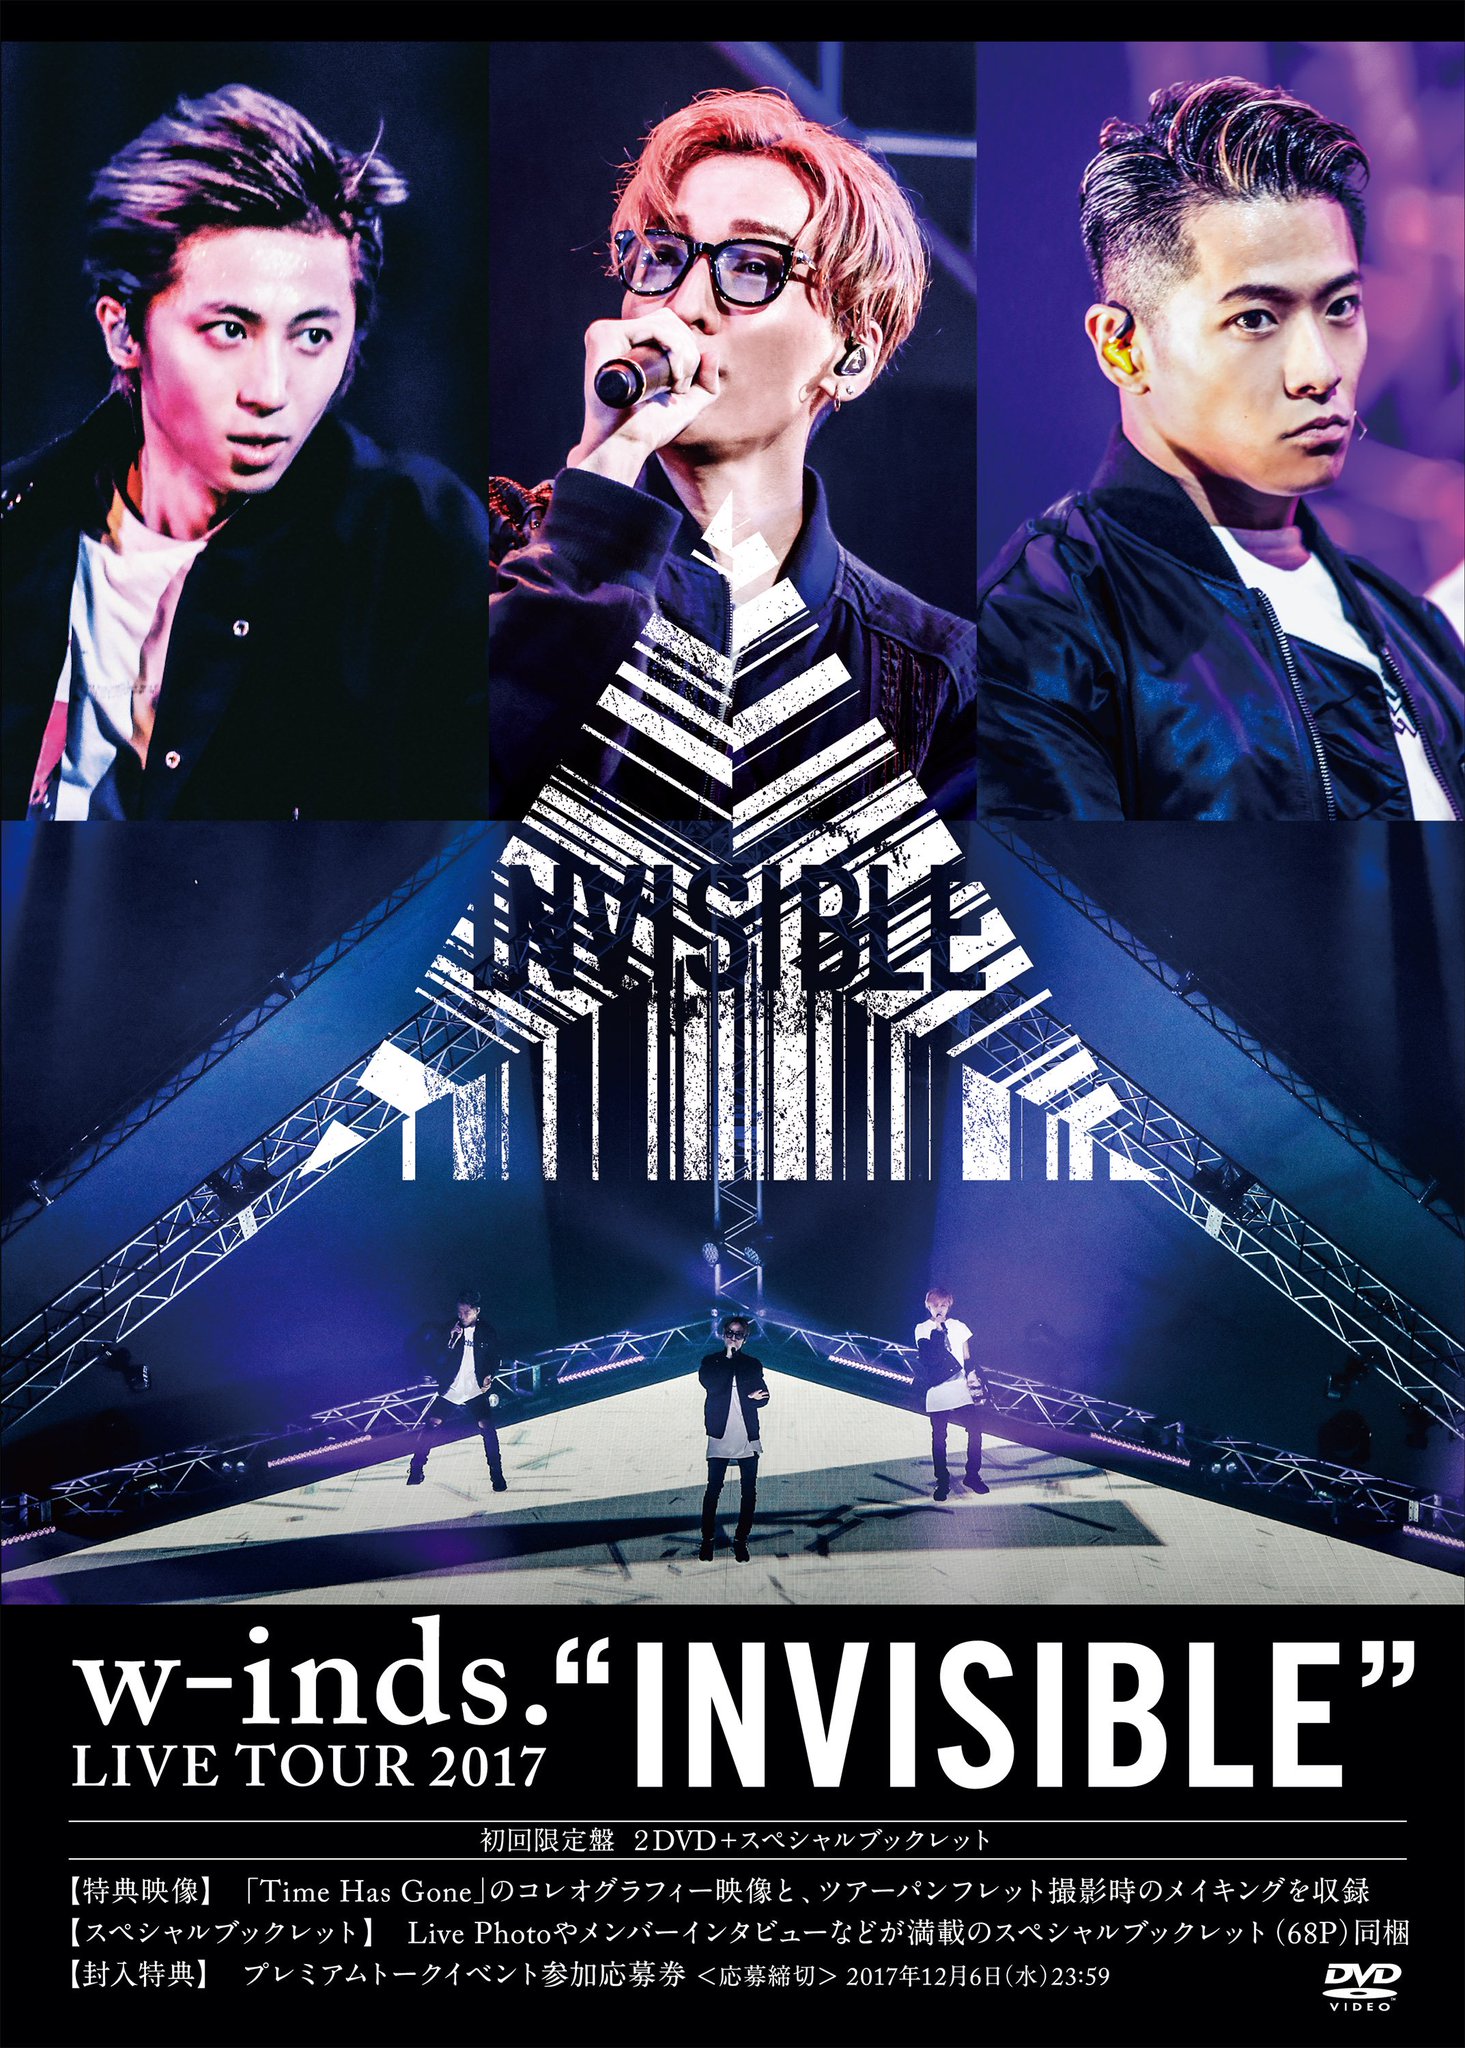 w-inds. LIVE TOUR 2017 "INVISIBLE"通常盤DVD n5ksbvb